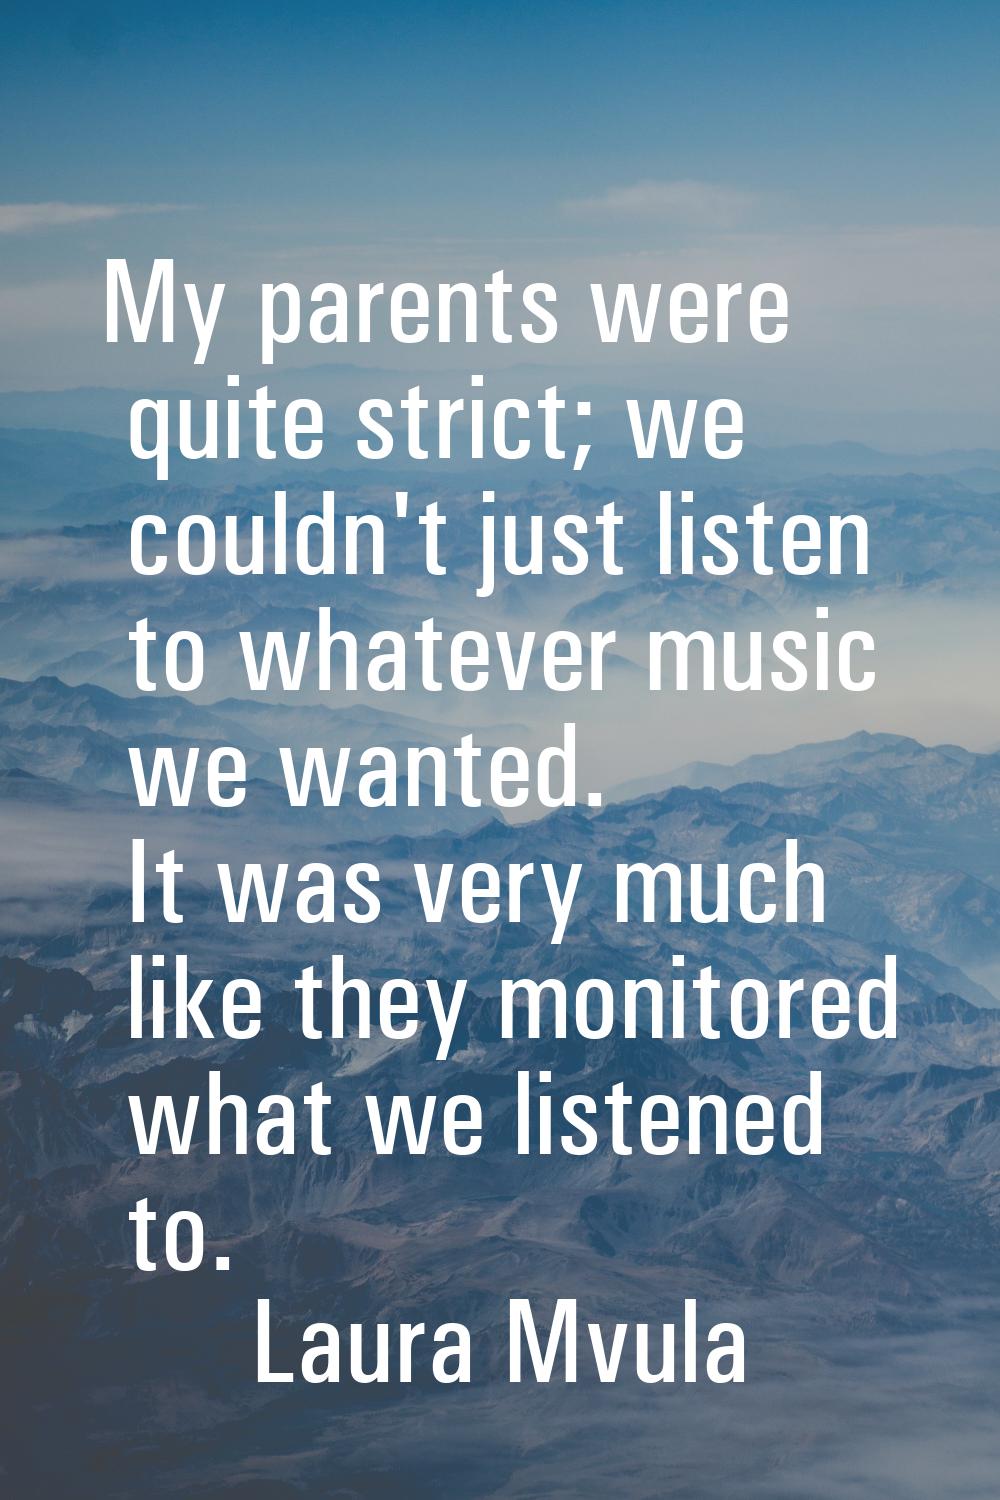 My parents were quite strict; we couldn't just listen to whatever music we wanted. It was very much